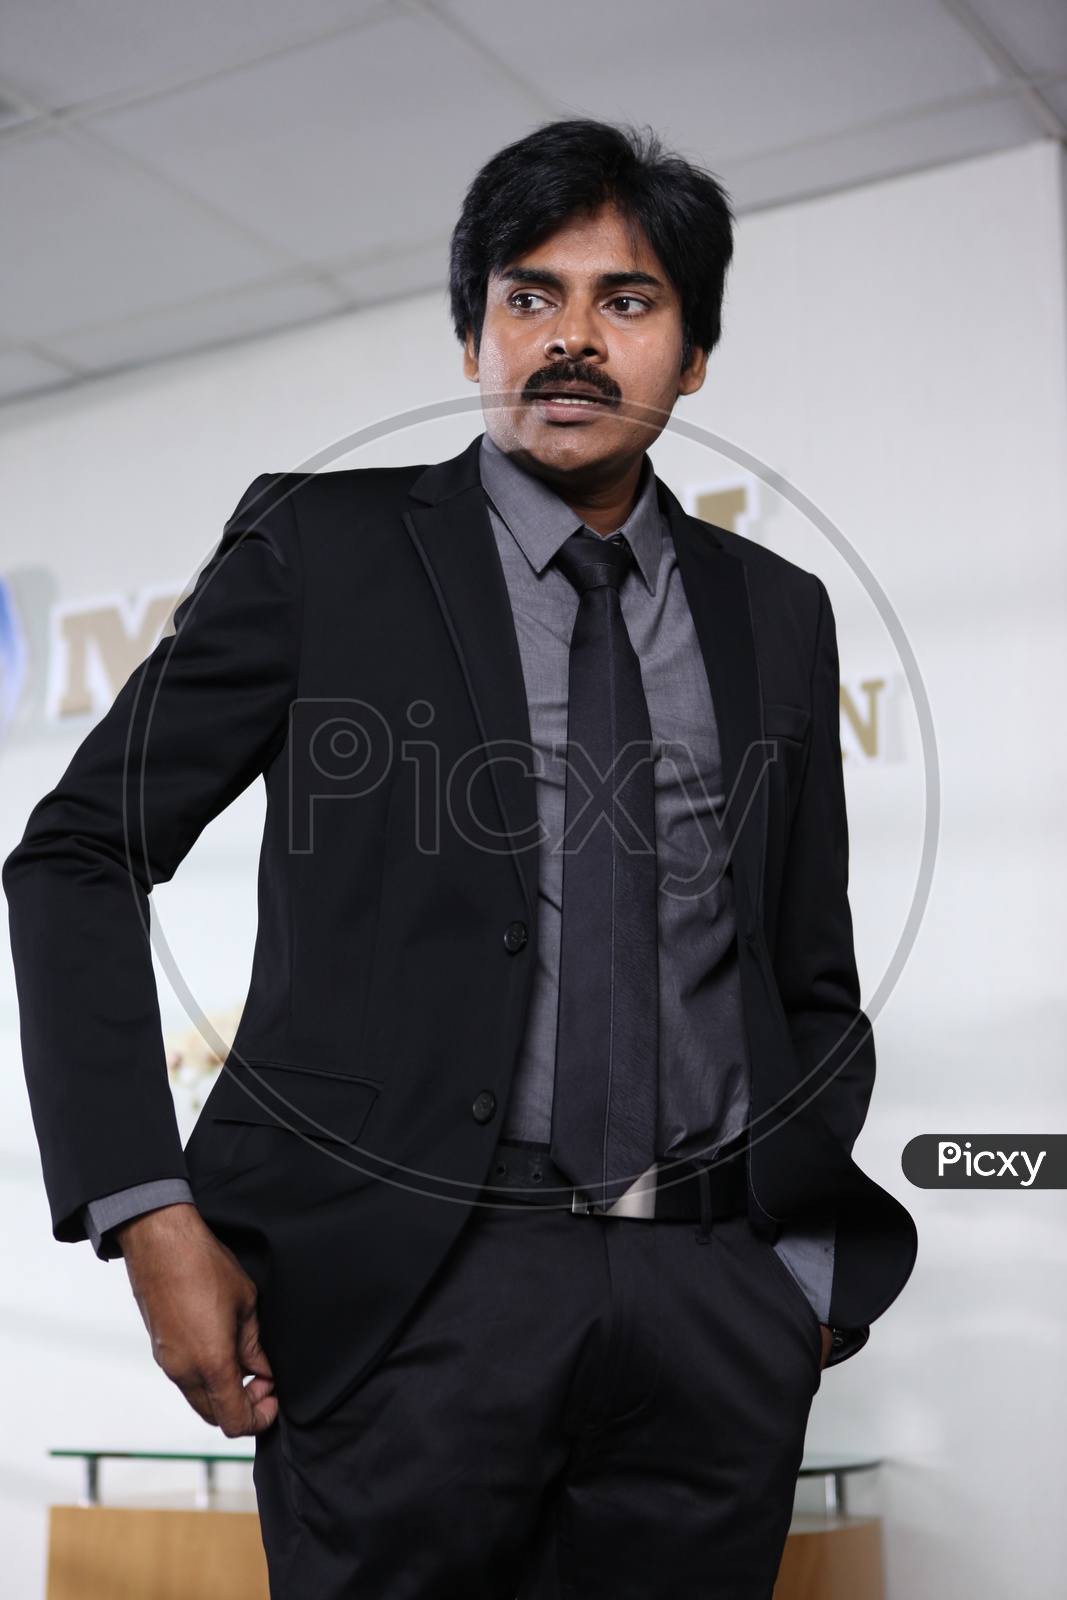 Tollywood Actor Pawan Kalyan in suit and office attire